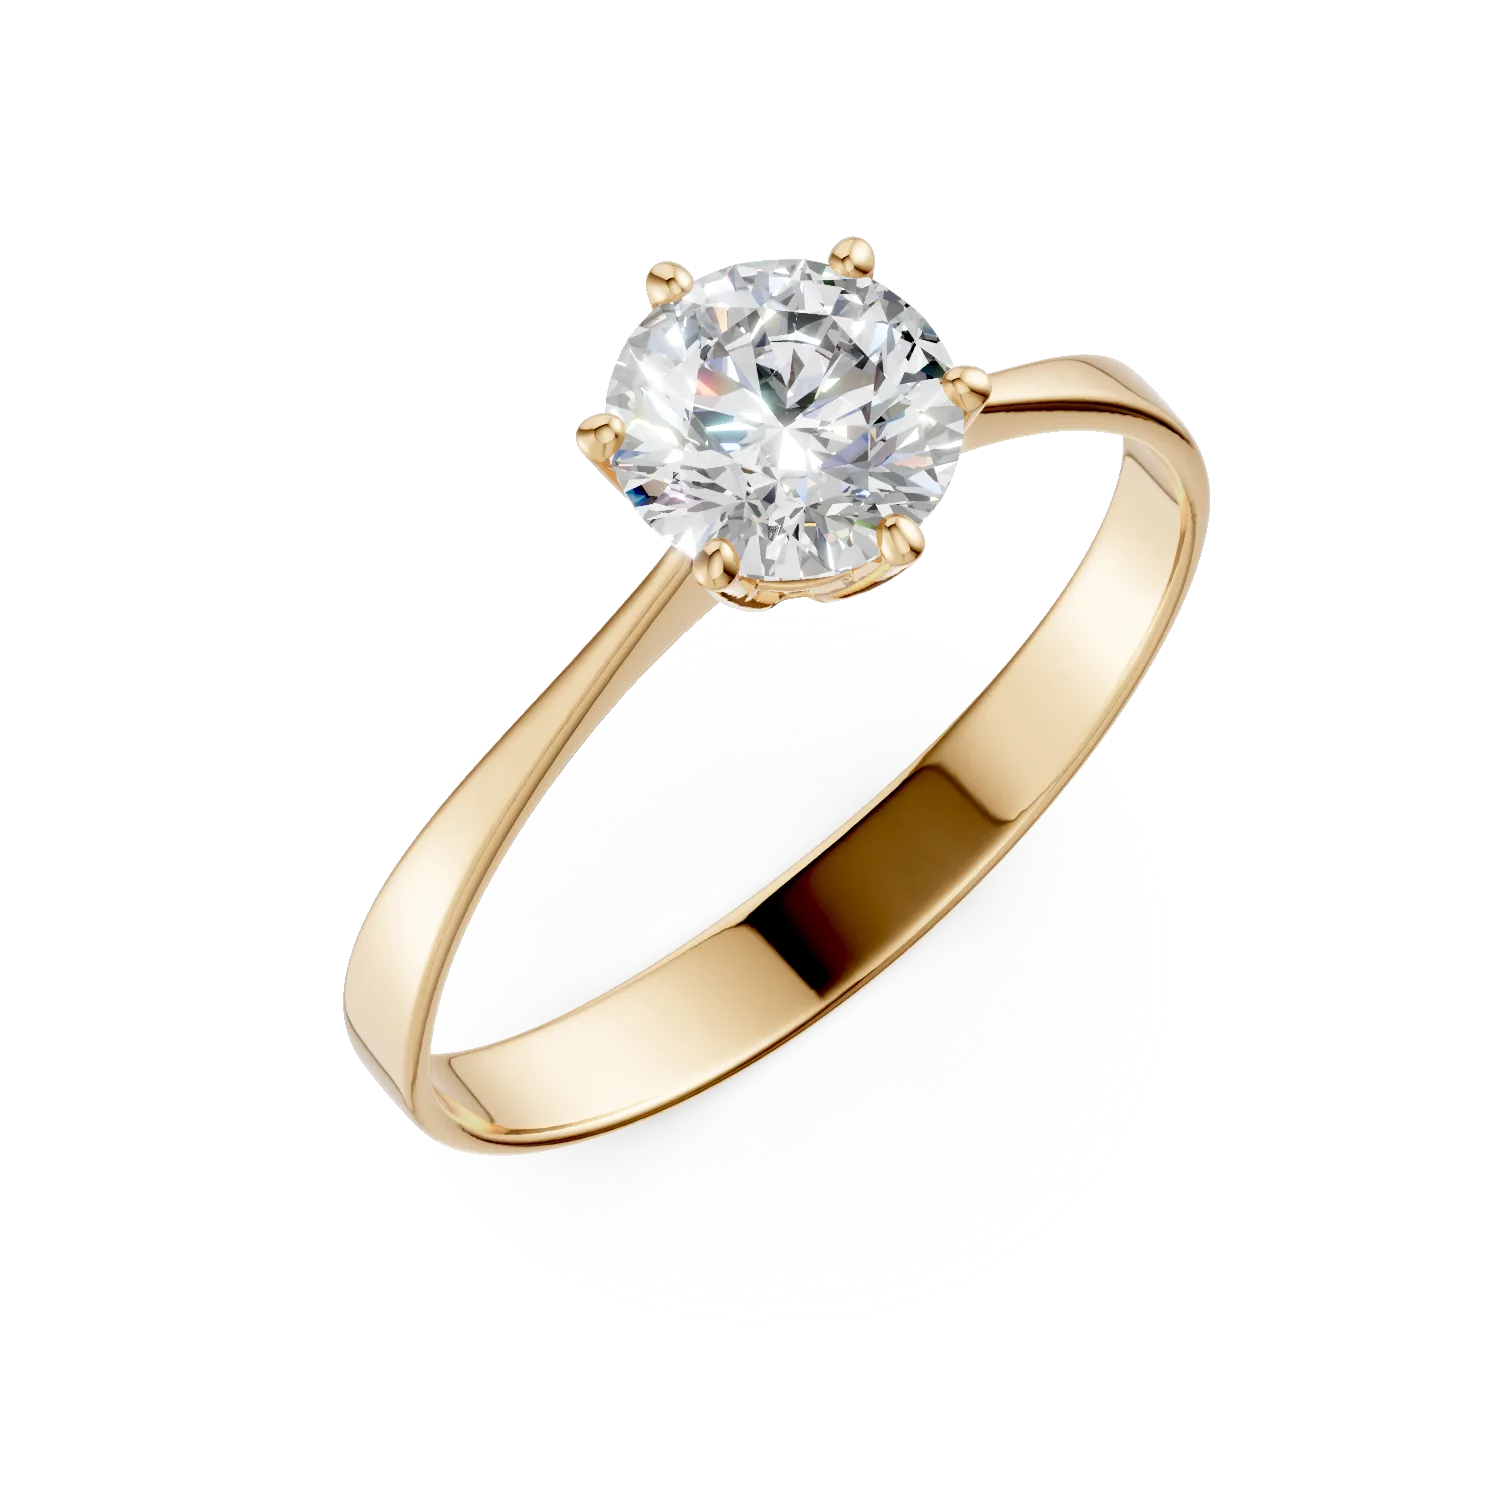 Yellow gold engagement ring with 0.8ct solitaire diamond